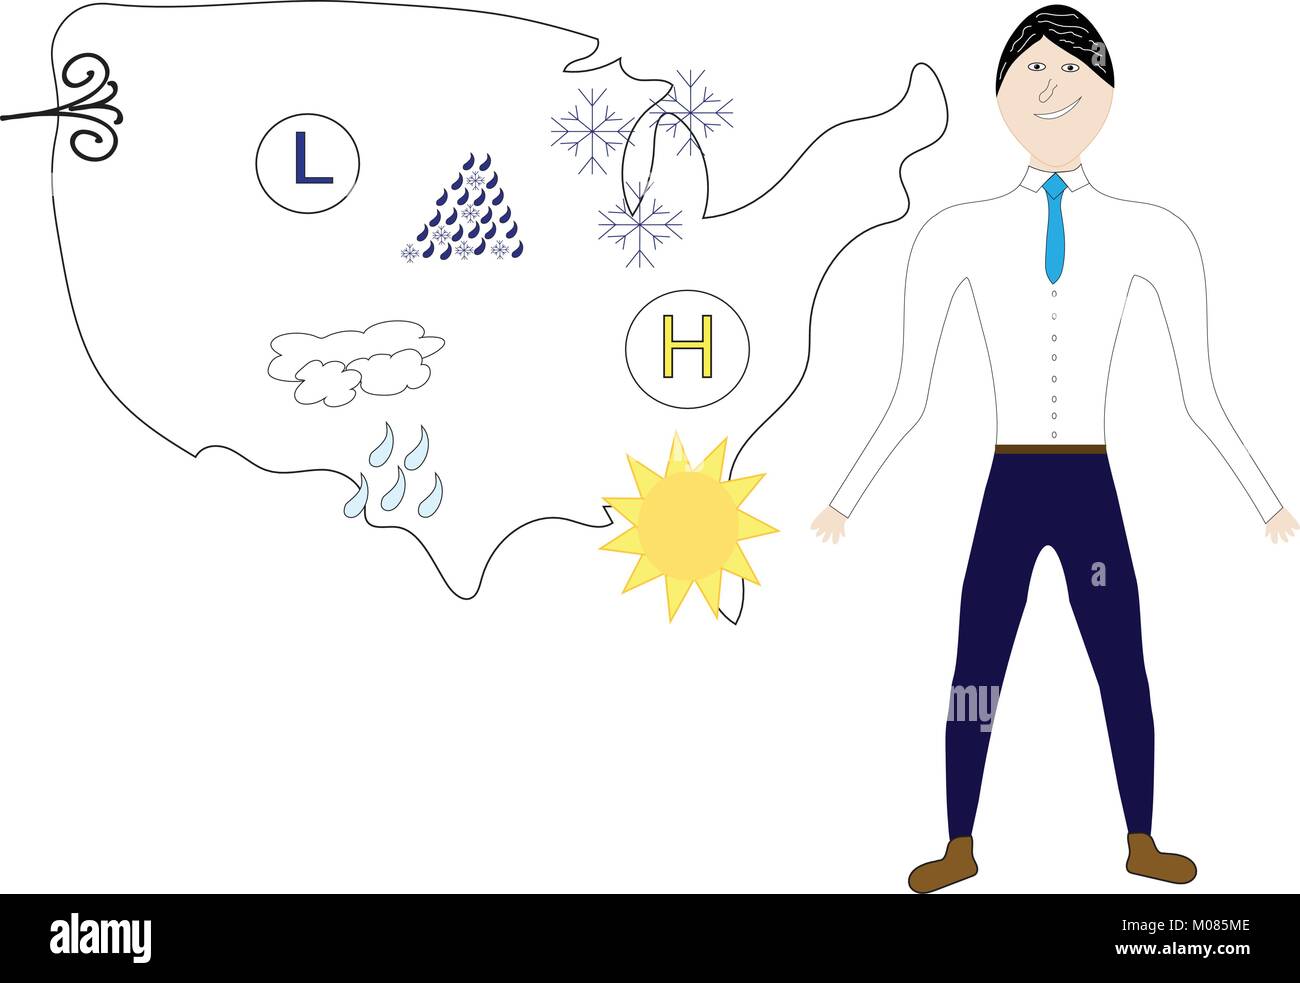 Weatherman standing in front of US map with weather icons. Stock Vector